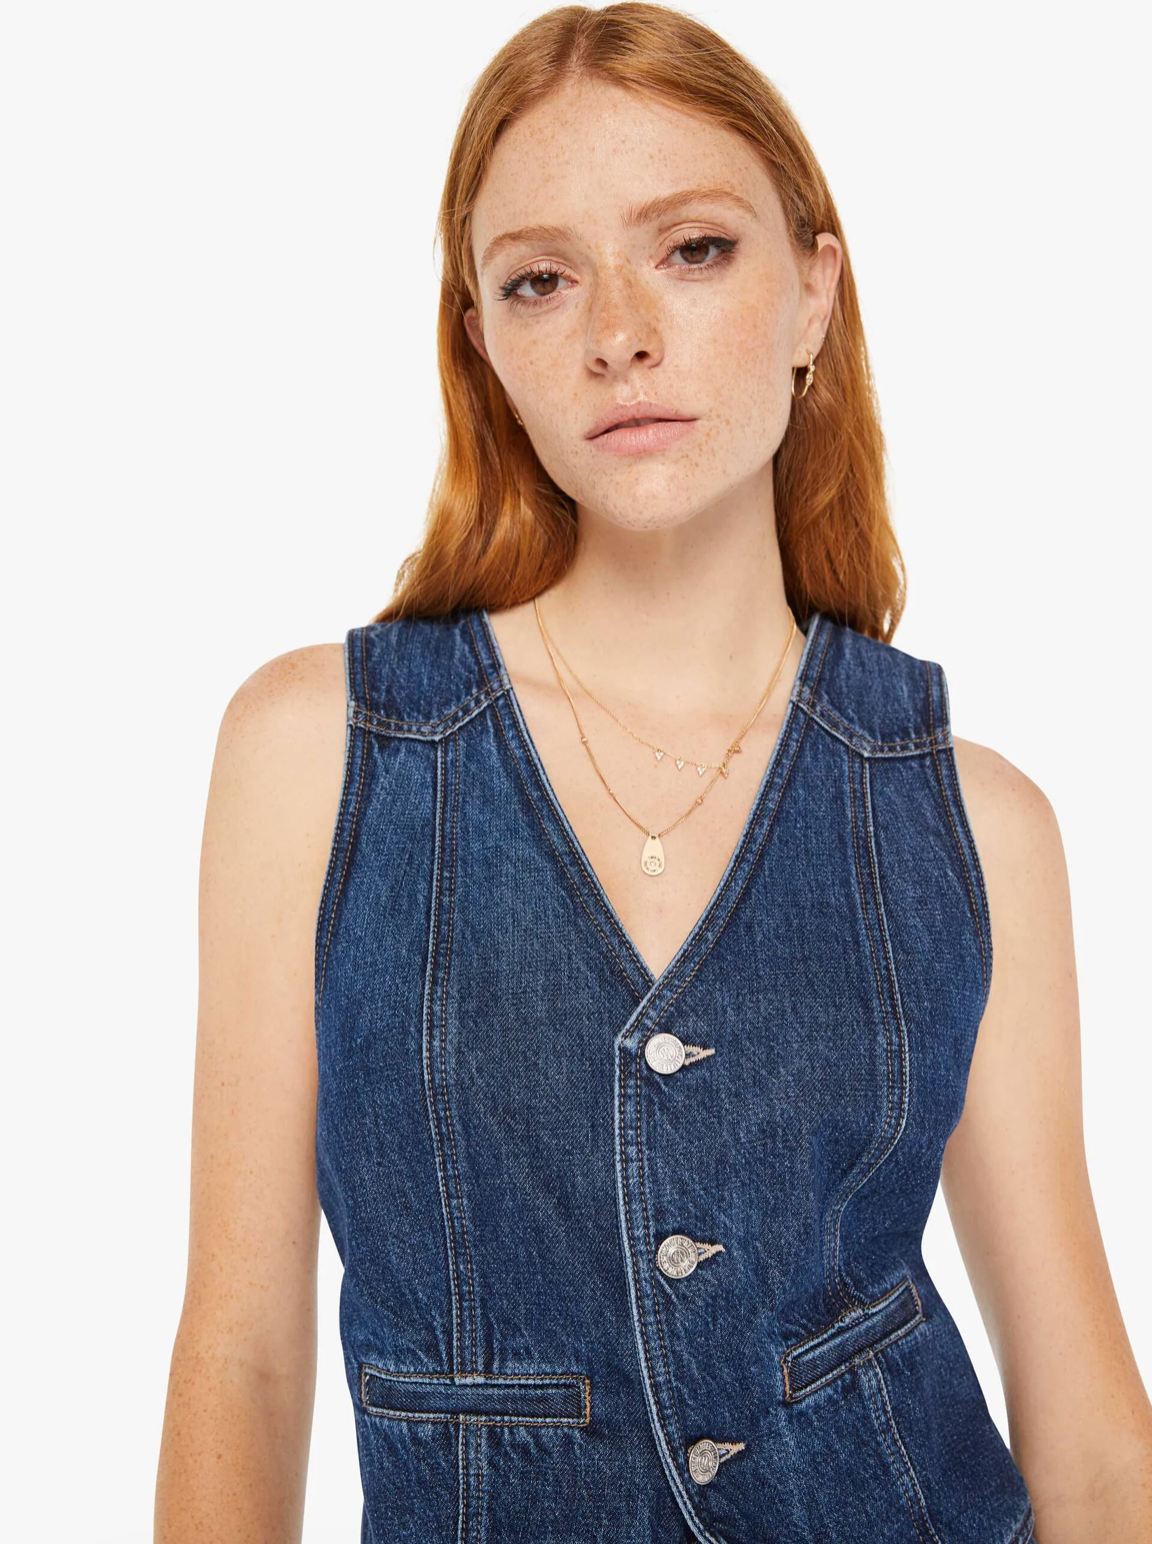 A young woman with red hair and freckles wearing a sleeveless denim dress with large buttons, standing against a plain white background. She has a subtle expression and wears a delicate necklace, perfectly embodying Mother style.